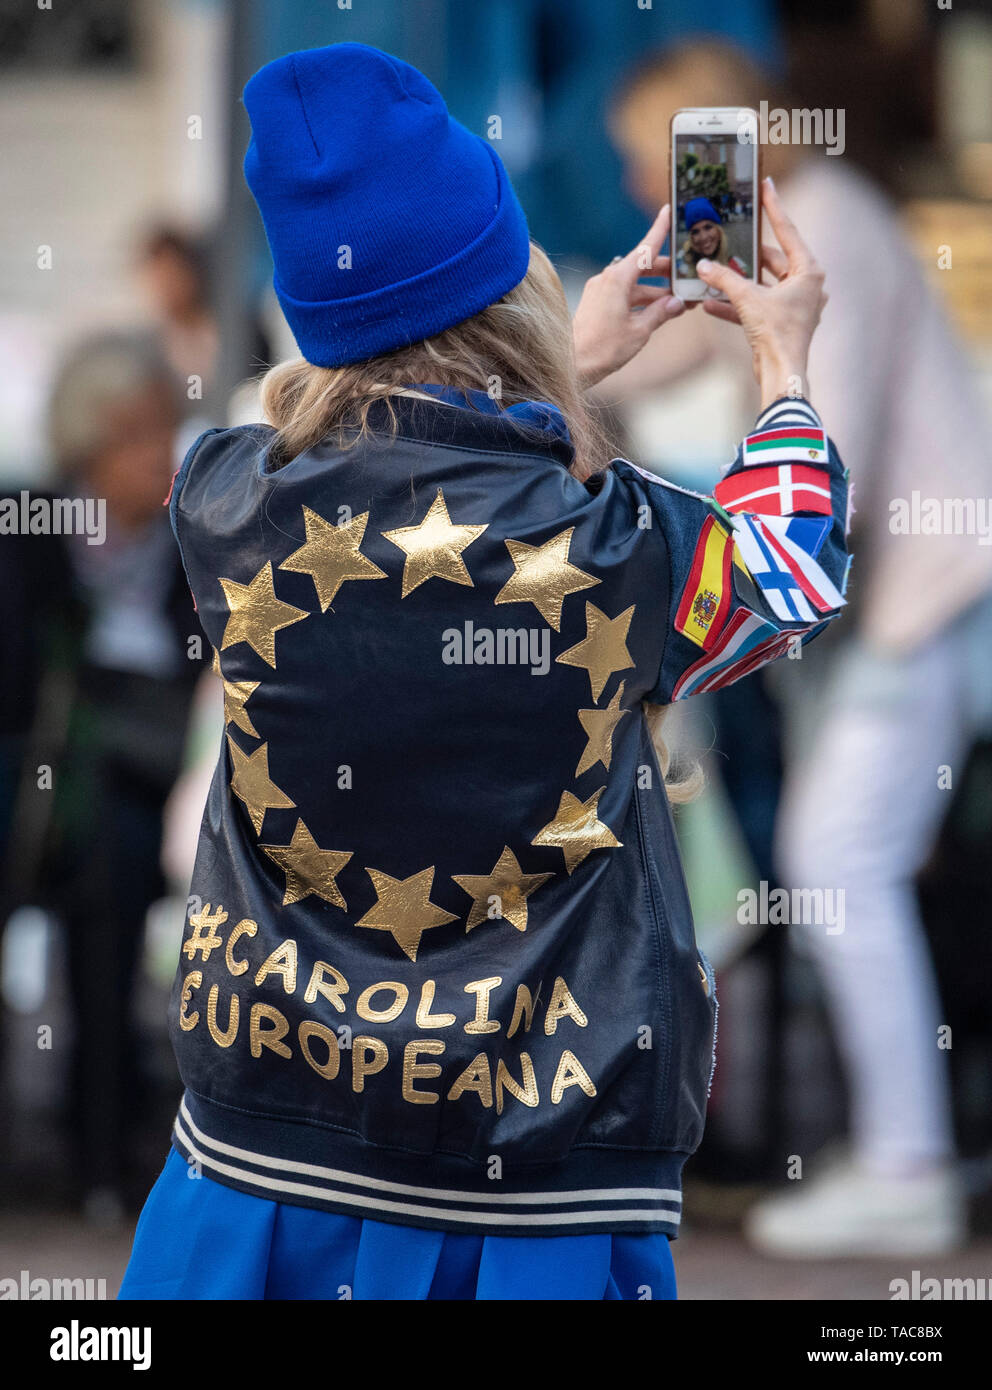 23 May 2019, Hessen, Frankfurt/Main: 'Carolina Europeana' is the name of a young woman who makes a selfie of herself at an event organised by 'Pulse of Europe'. As part of the campaign, the Paulskirche is to be illuminated in blue in a light art campaign. Photo: Boris Roessler/dpa Stock Photo